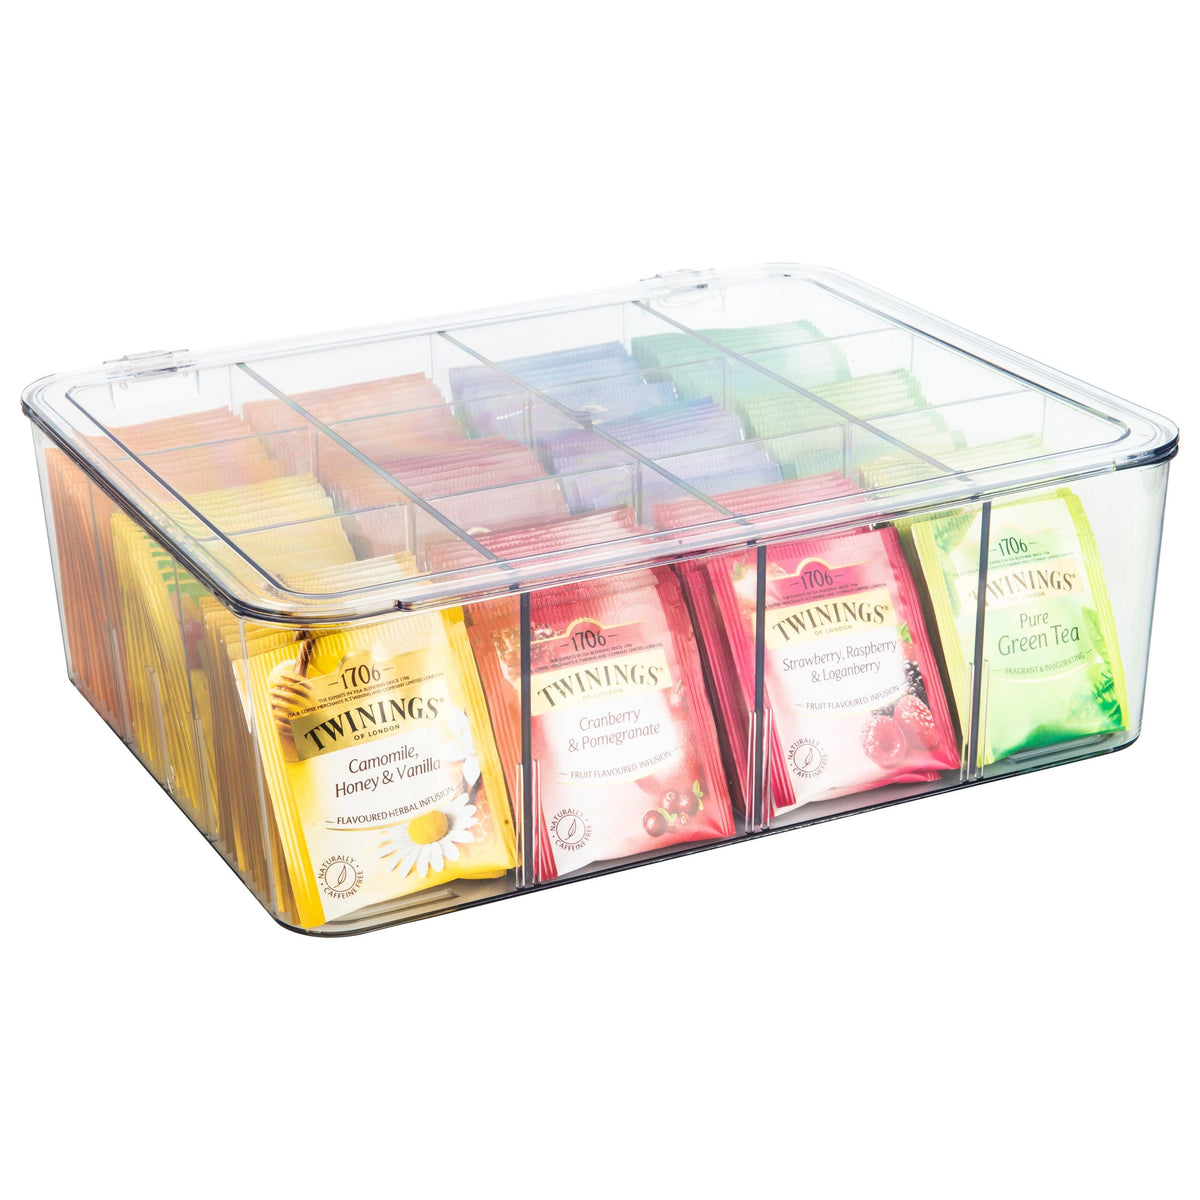 Multipurpose Plastic Storage Box with 8 Removable Dividers